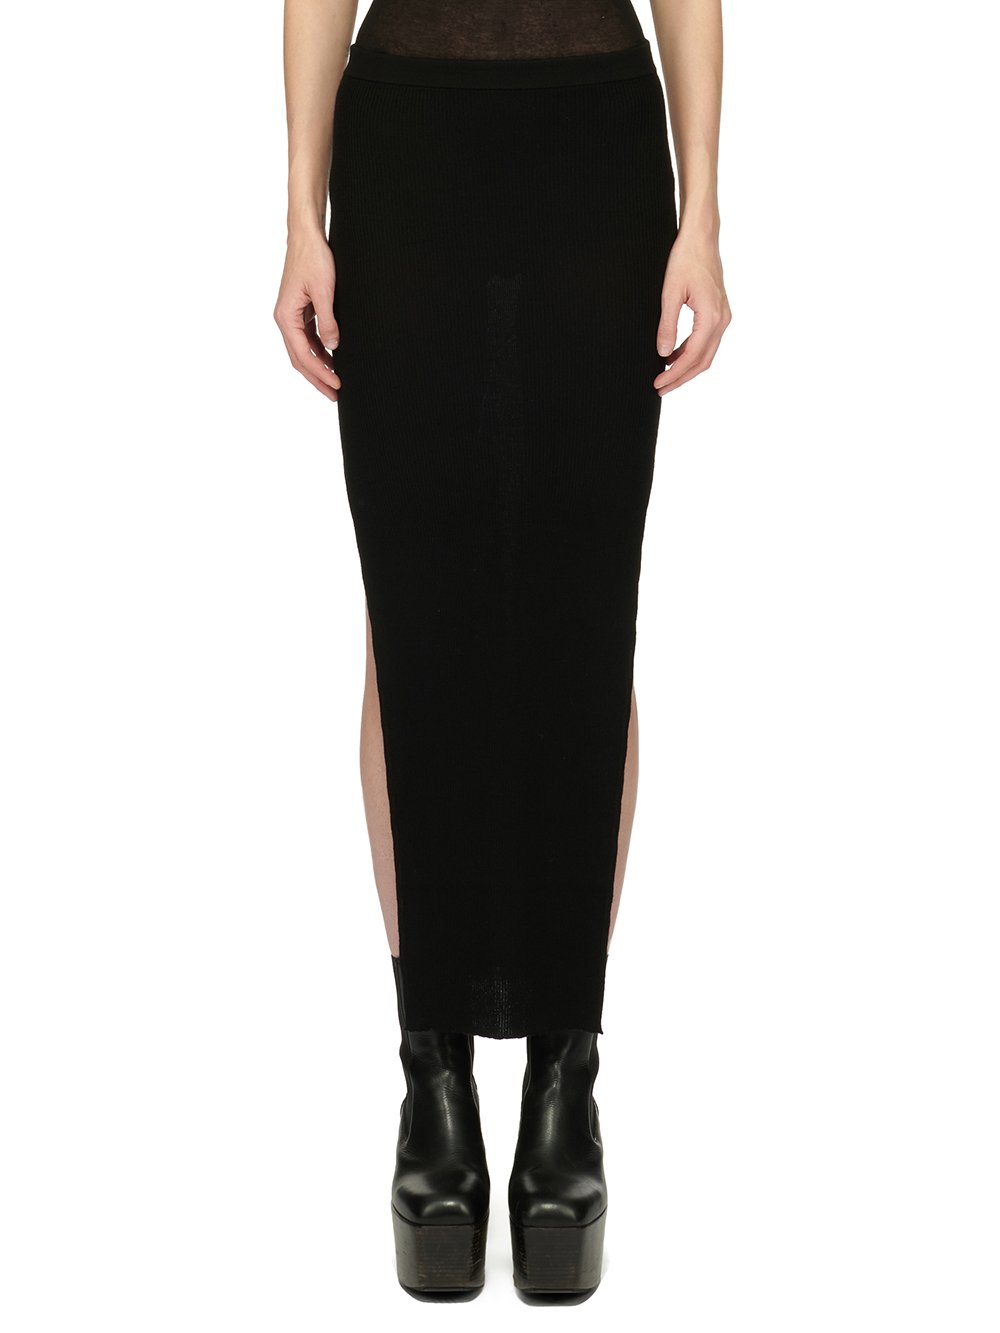 RICK OWENS FW23 LUXOR RIBBED SACRISKIRT IN BLACK LIGHTWEIGHT RIBBED KNIT